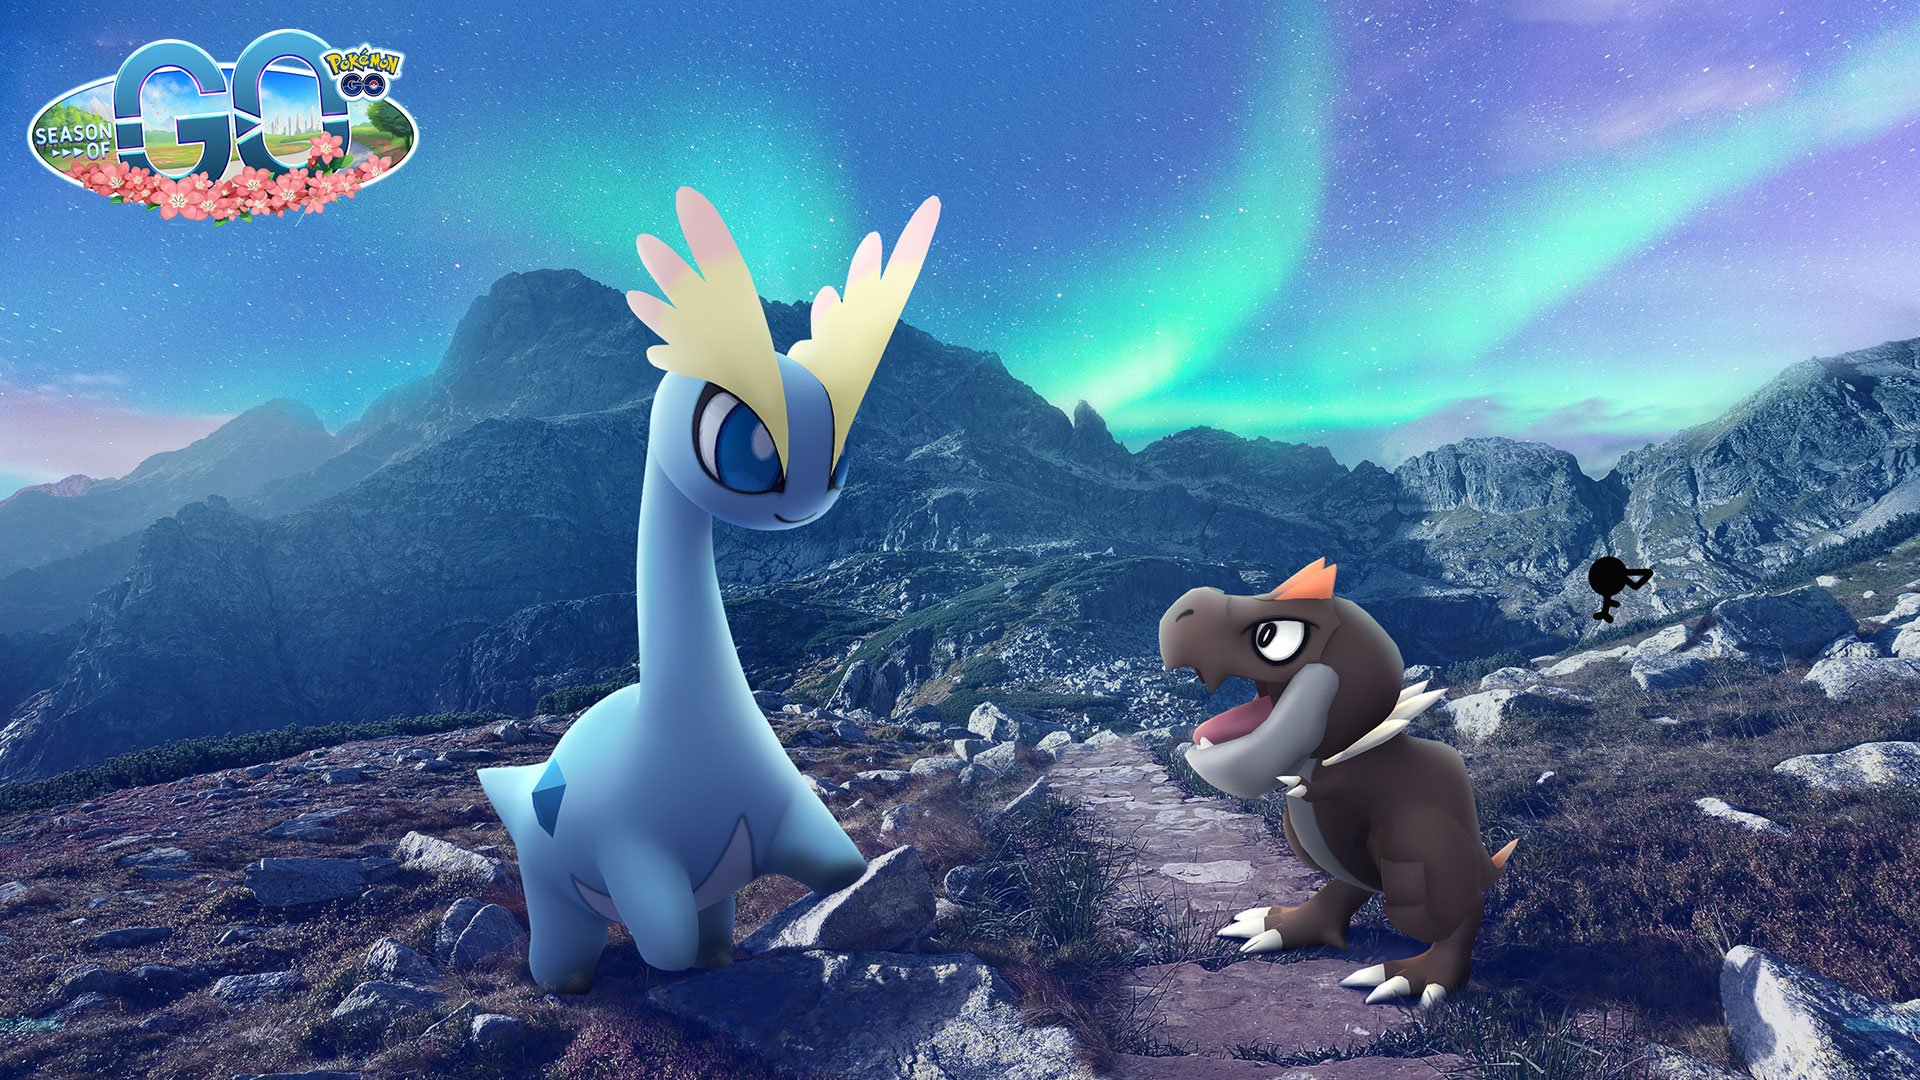 Players Report that Onix will be the Star of the First Pokemon Spotlight  Hour